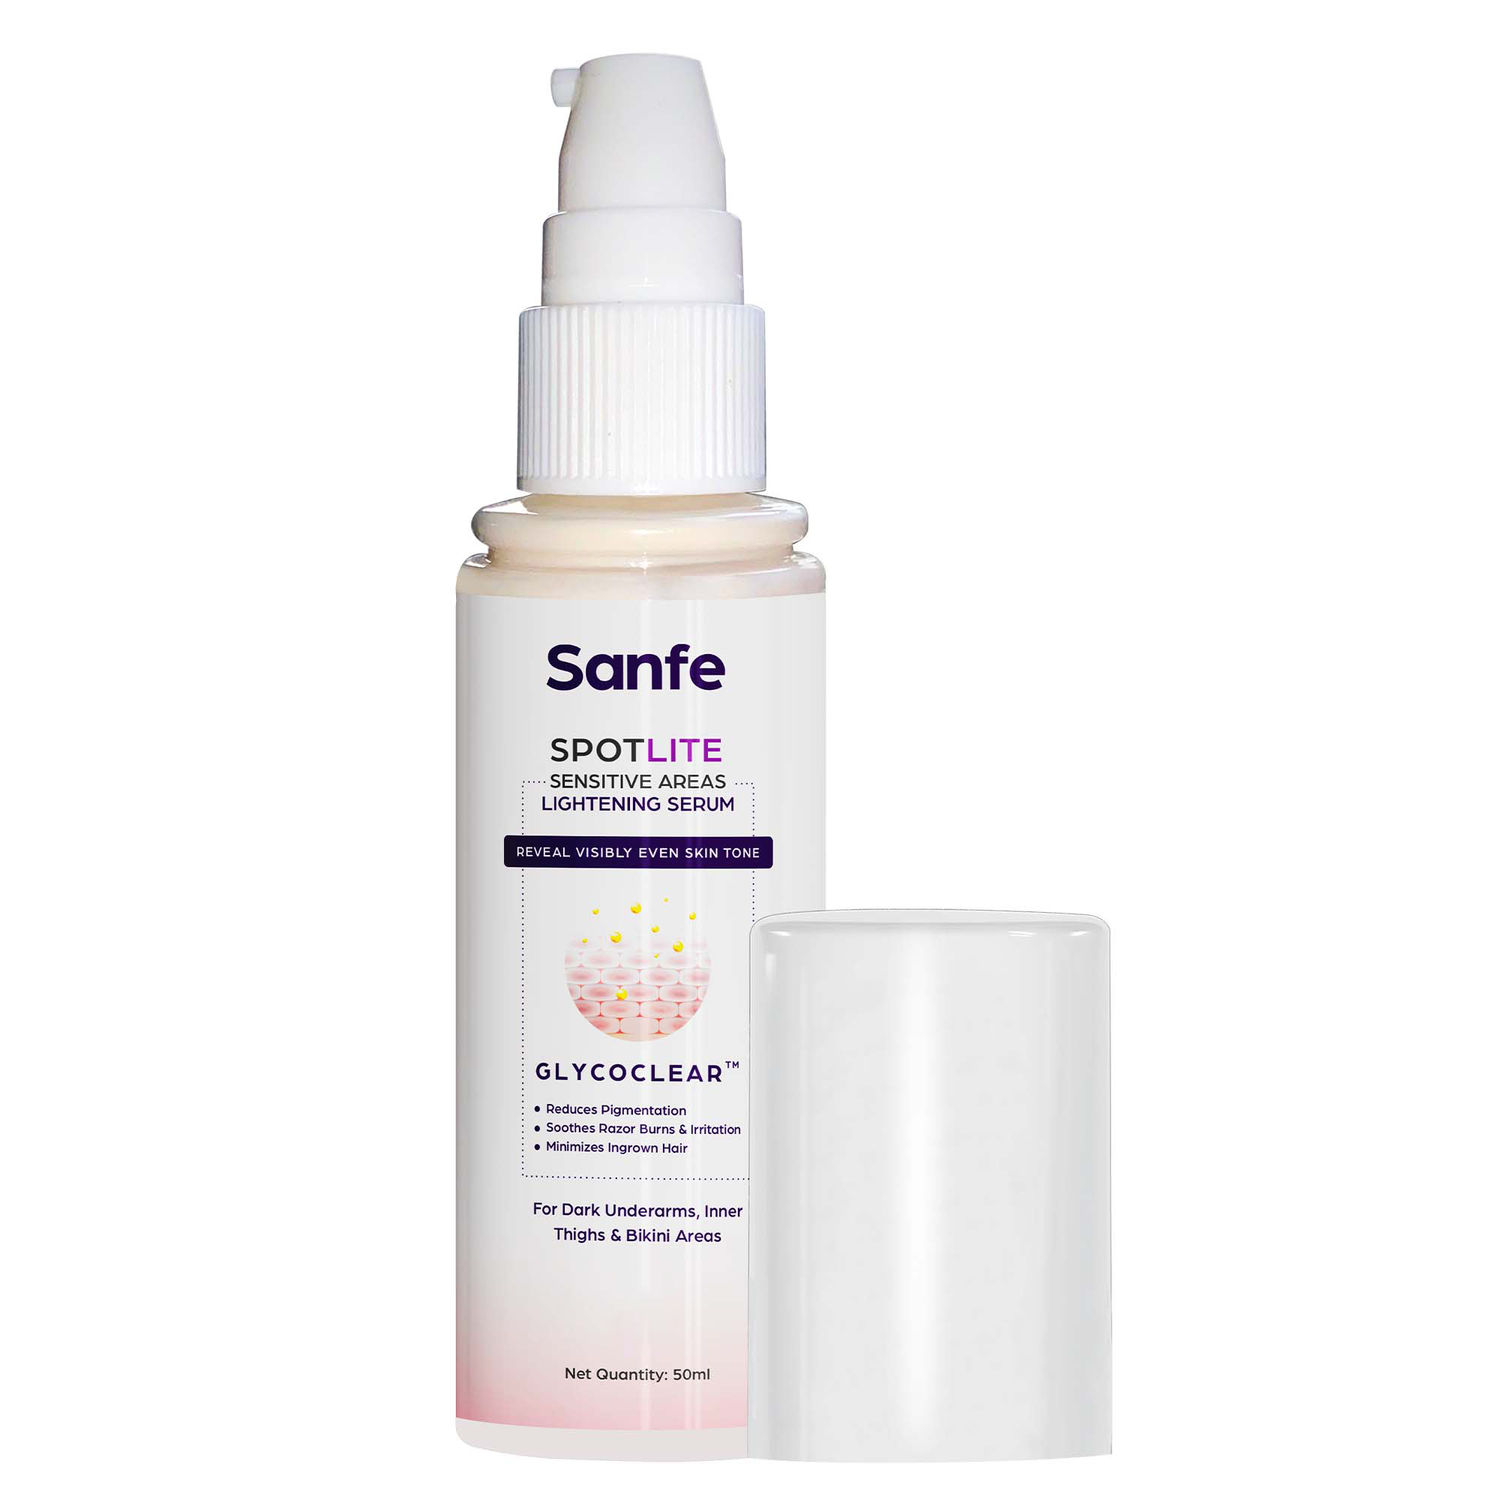 Buy Sanfe Spotlite Sensitive Body Serum for Dark Underarms, Inner Thighs and Sensitive Areas, 10X Powerful, Enriched with Kojic Acid, 4% Niacinnamide Helps in Depigmentation for All Skin Type, 50g - Purplle